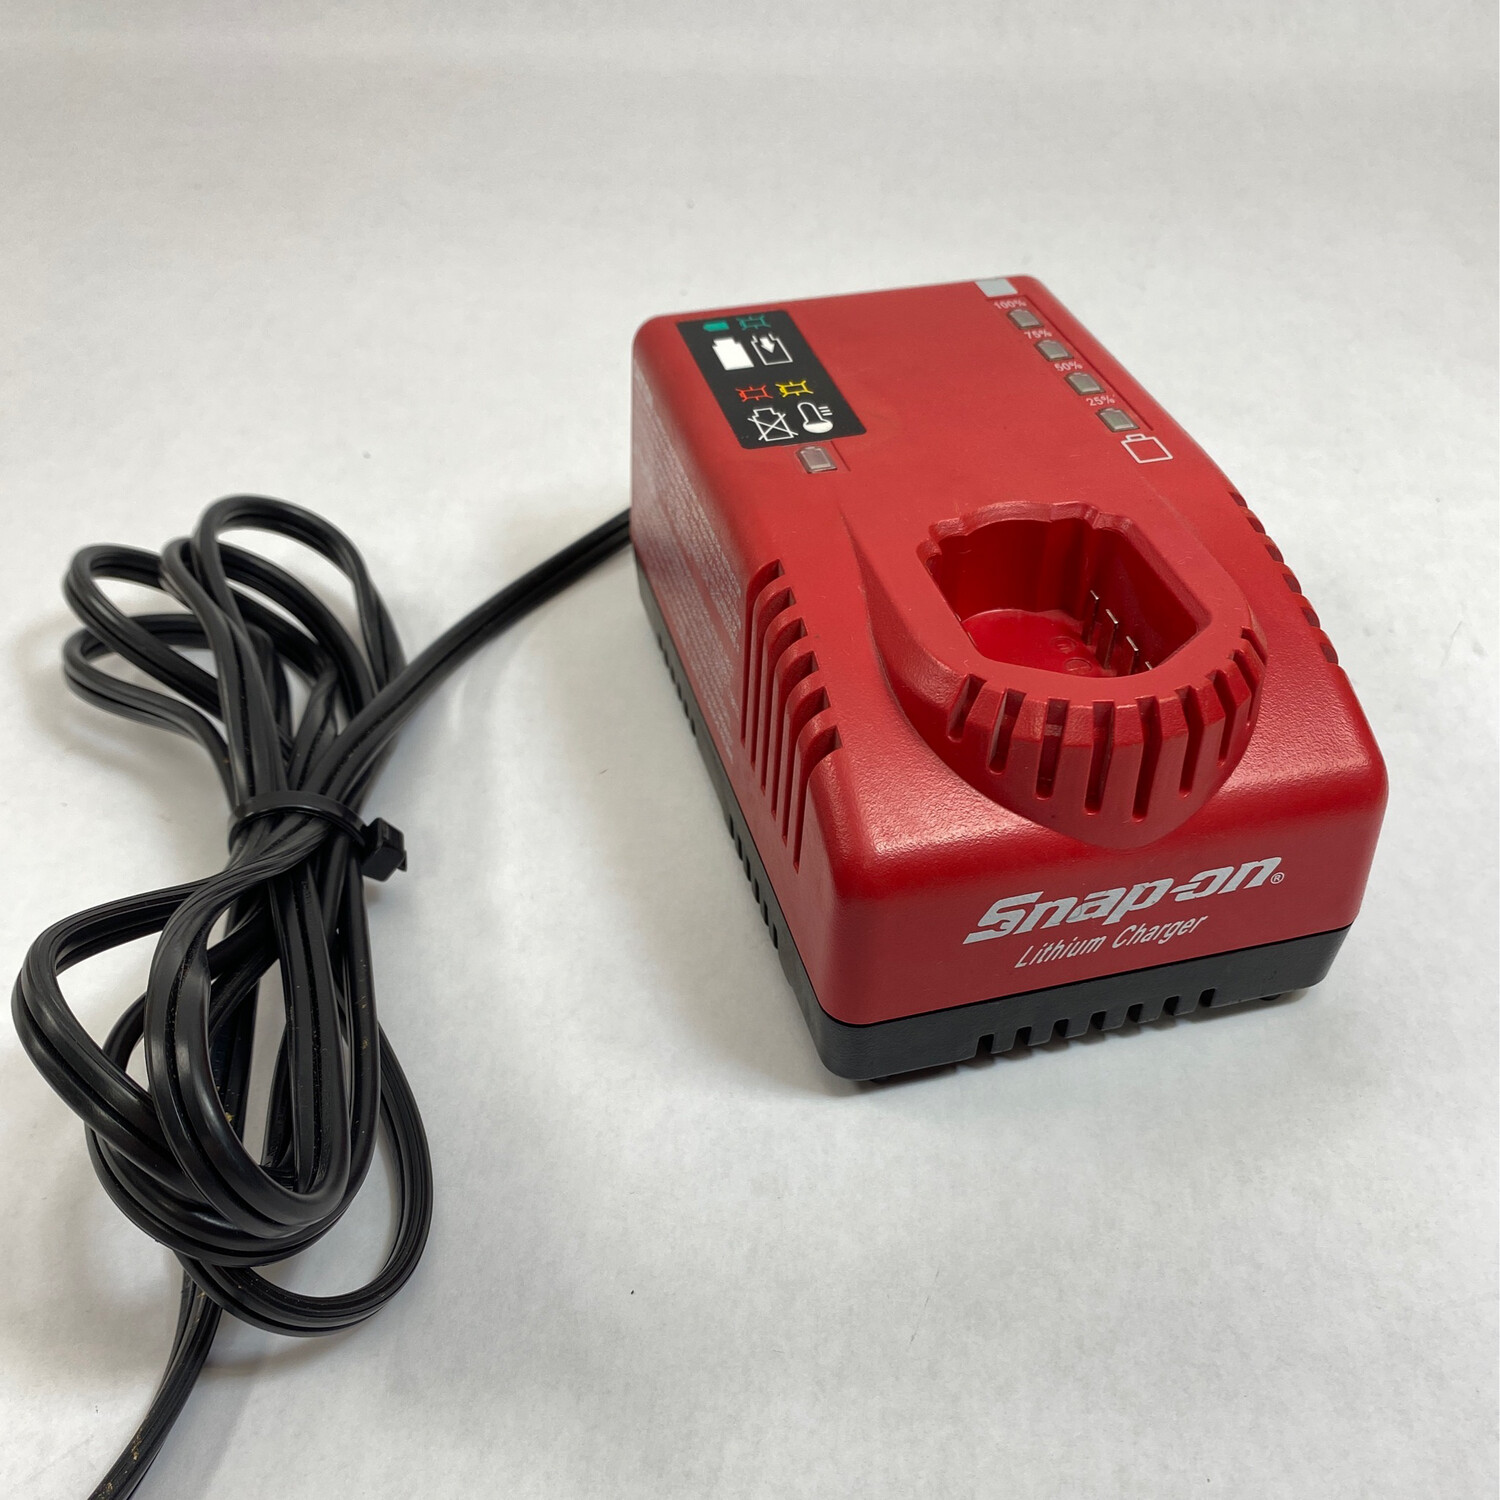 Snap On 14.4v Lithium Battery Charger, CTC772